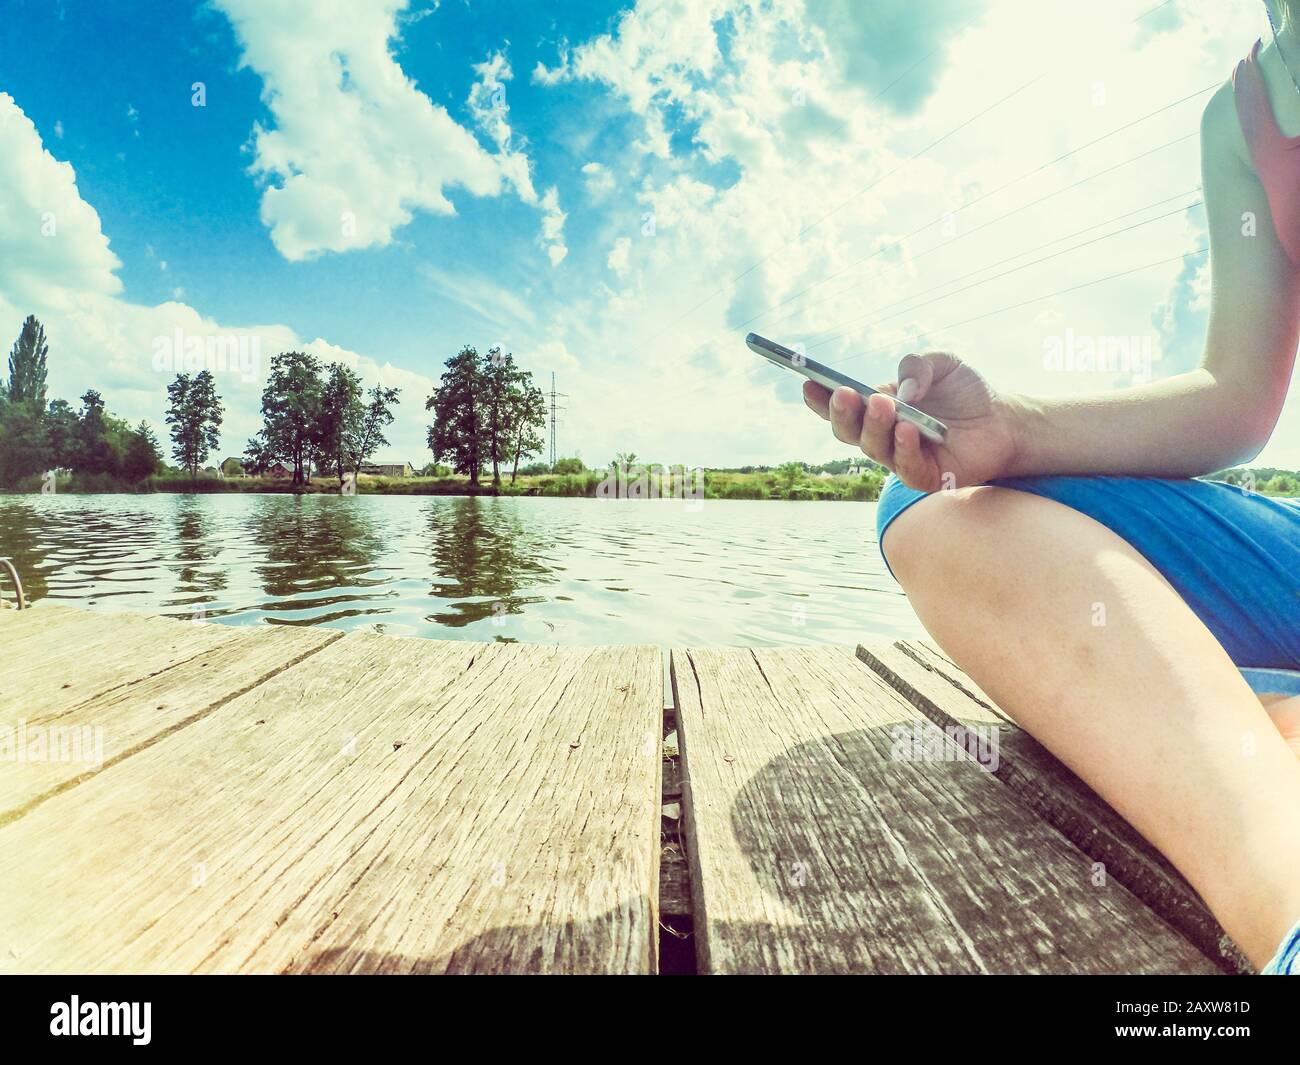 A girl with a phone in her hand sits on the wood surface near the surface of the water. Shot from below. Wide angle action camera go pro. Stock Photo